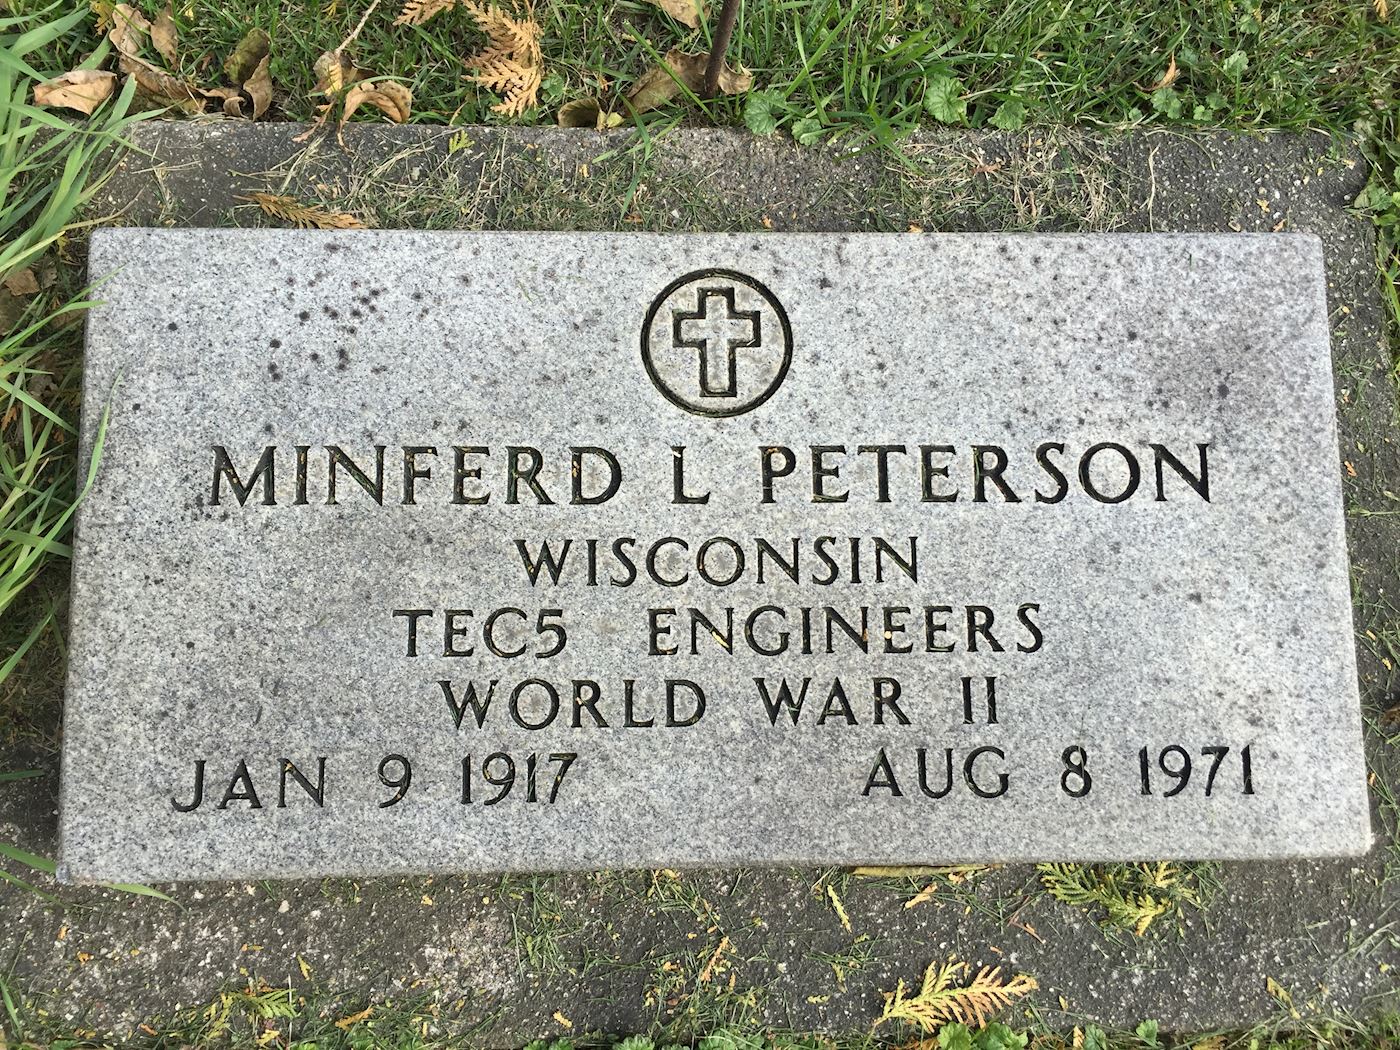 Minferd Peterson's stone after cleaning